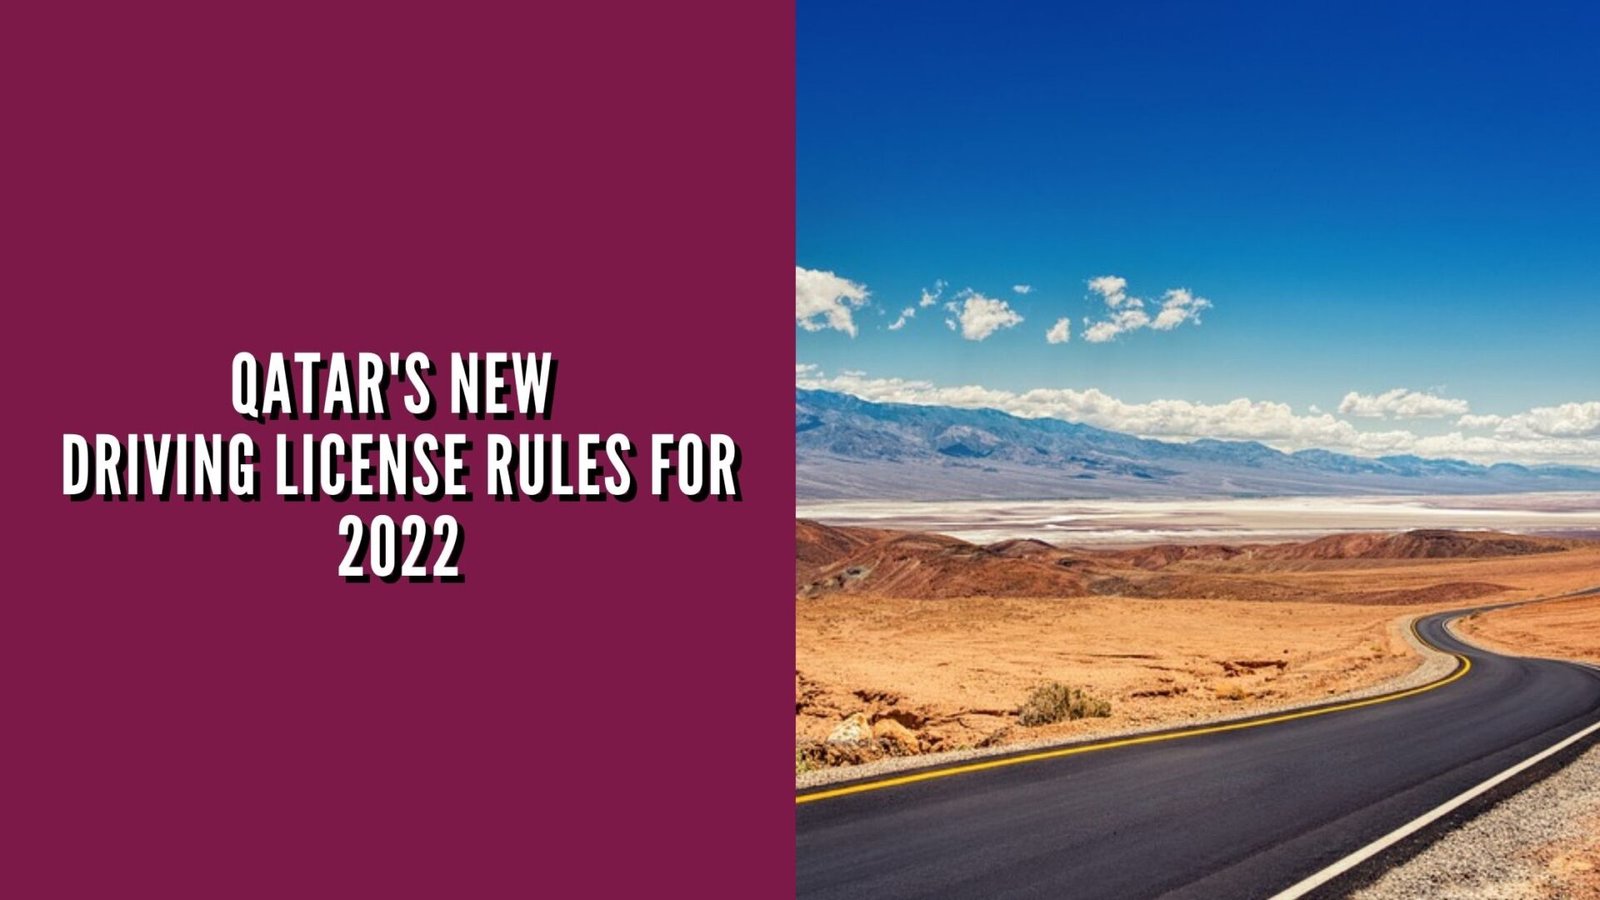 Qatar New Driving License Rules for 2022 (1)